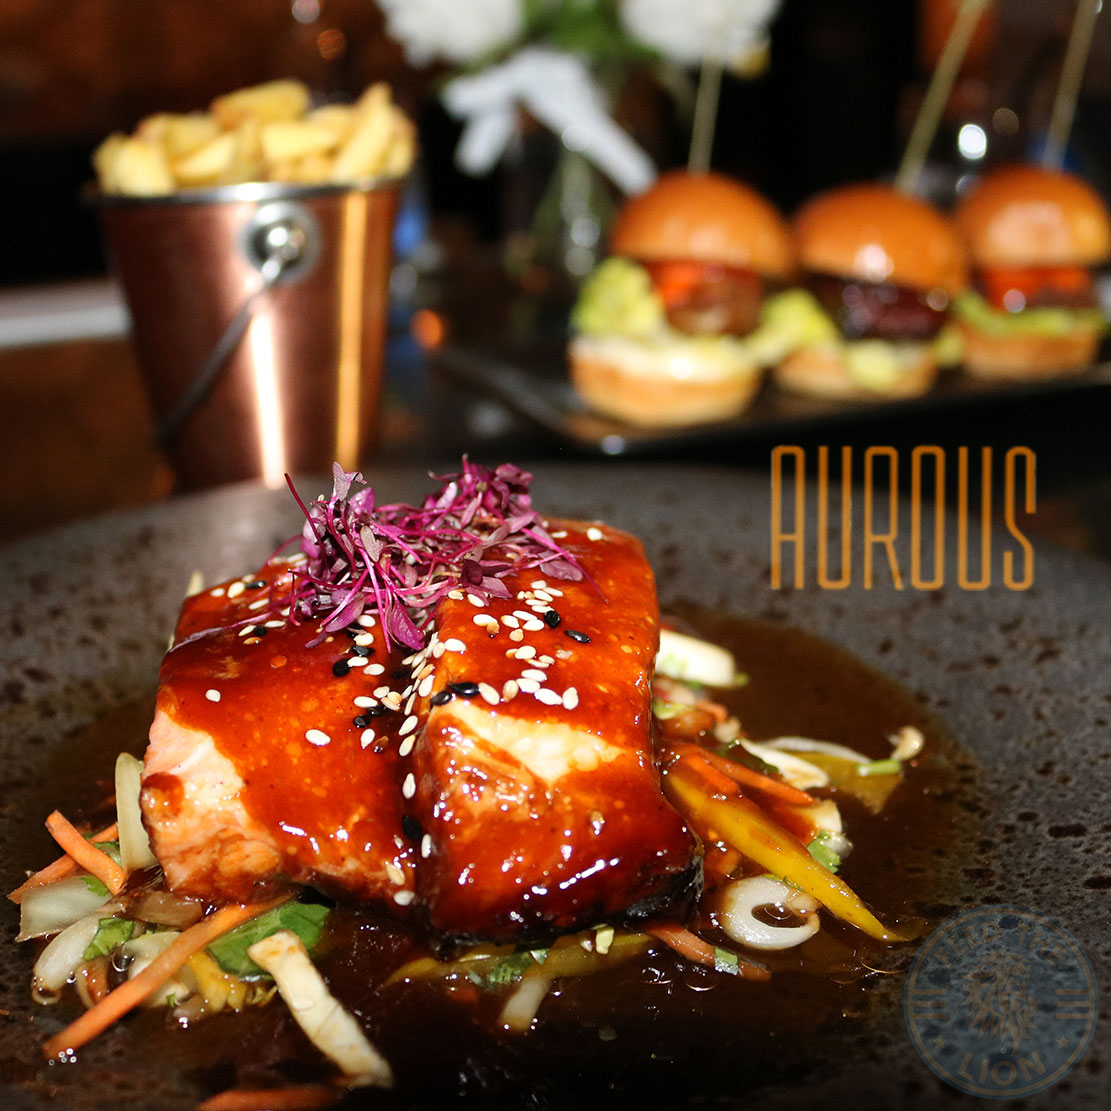 Aurous Manchester Halal restaurant - Feed the Lion